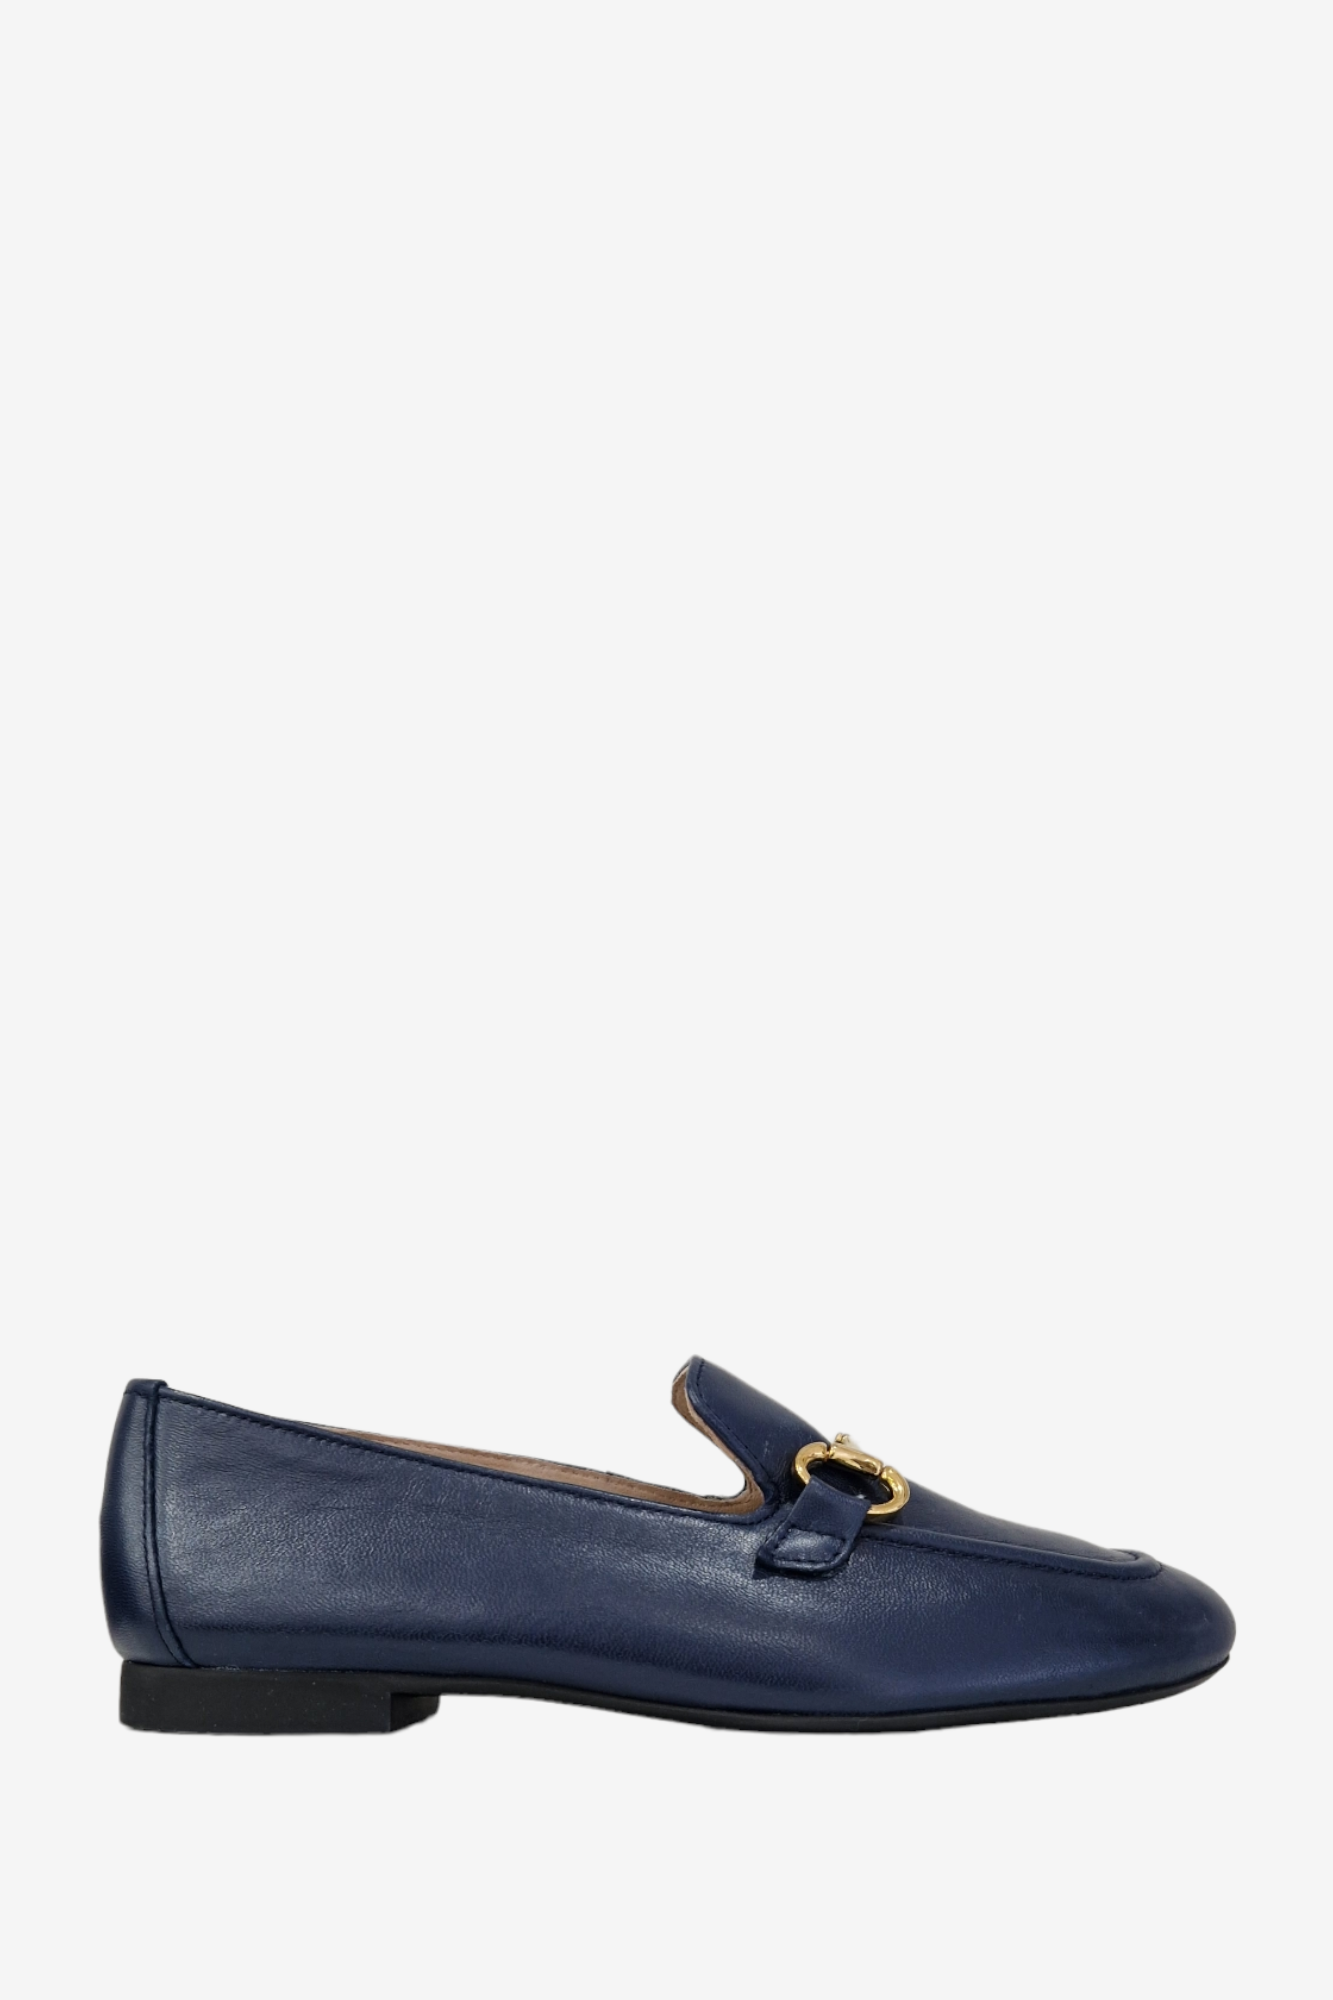 PAUL GREEN 2596 NAVY SUPER SOFT LEATHER LOAFERS